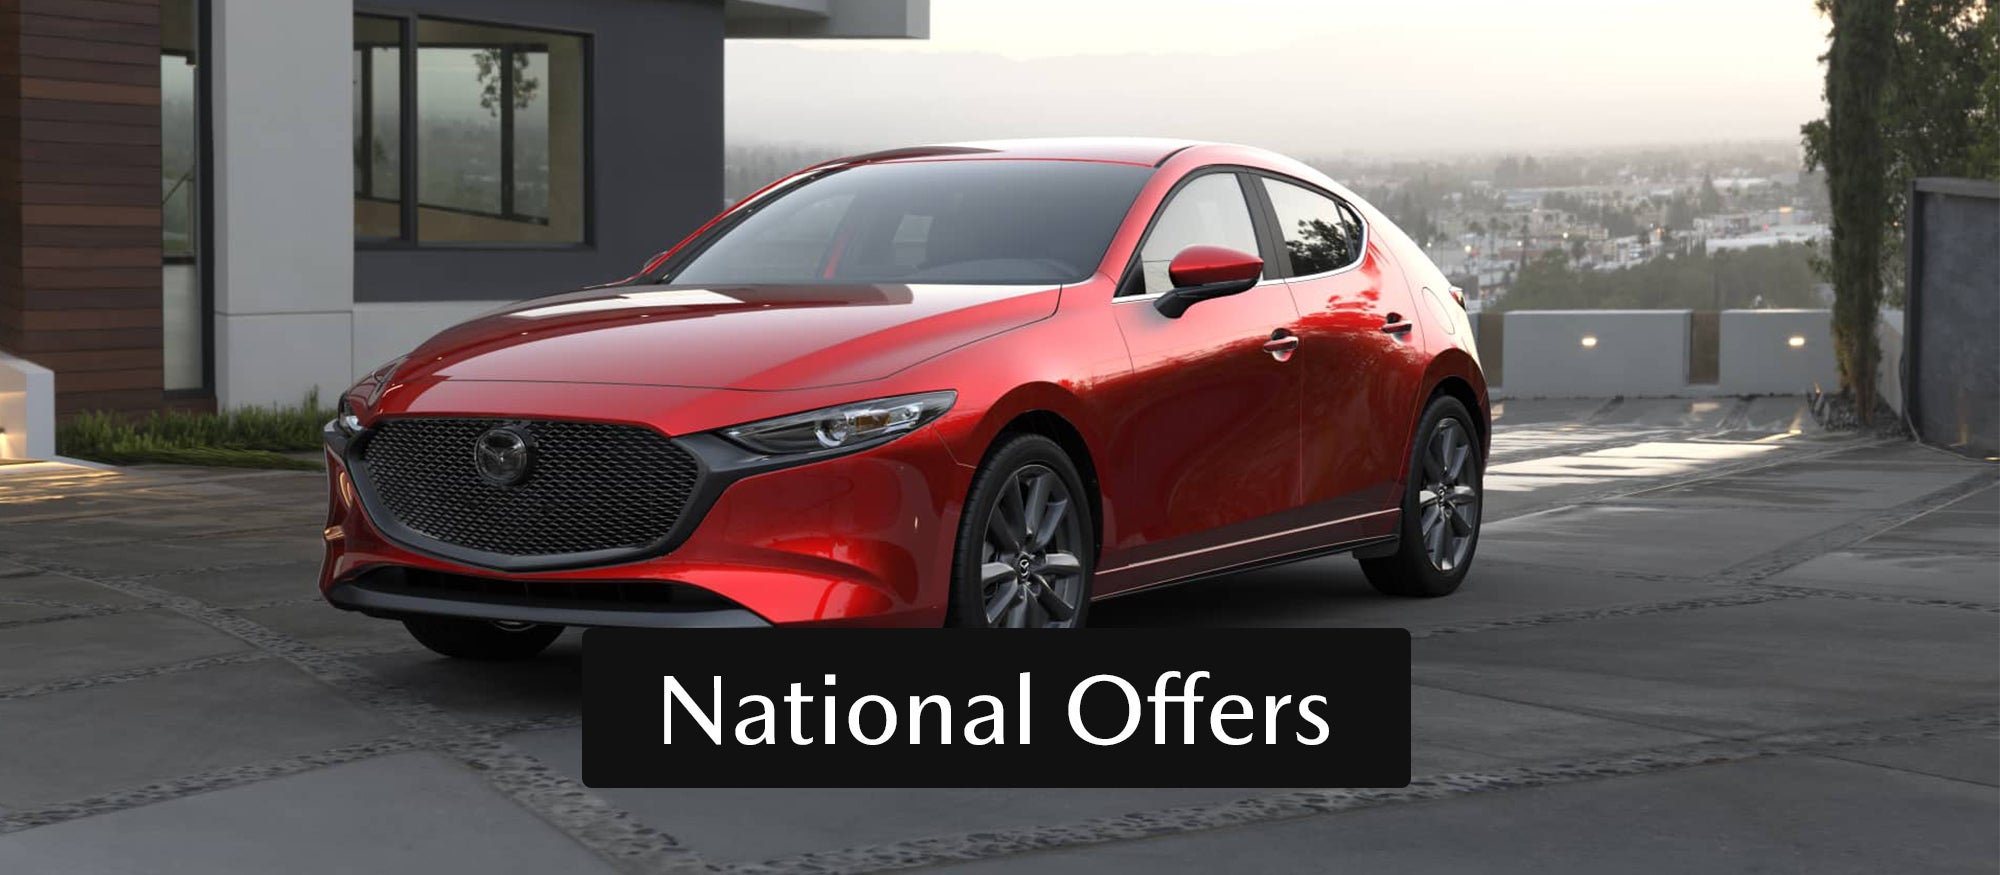 National Offers | Open Road Mazda of Morristown in Morristown NJ